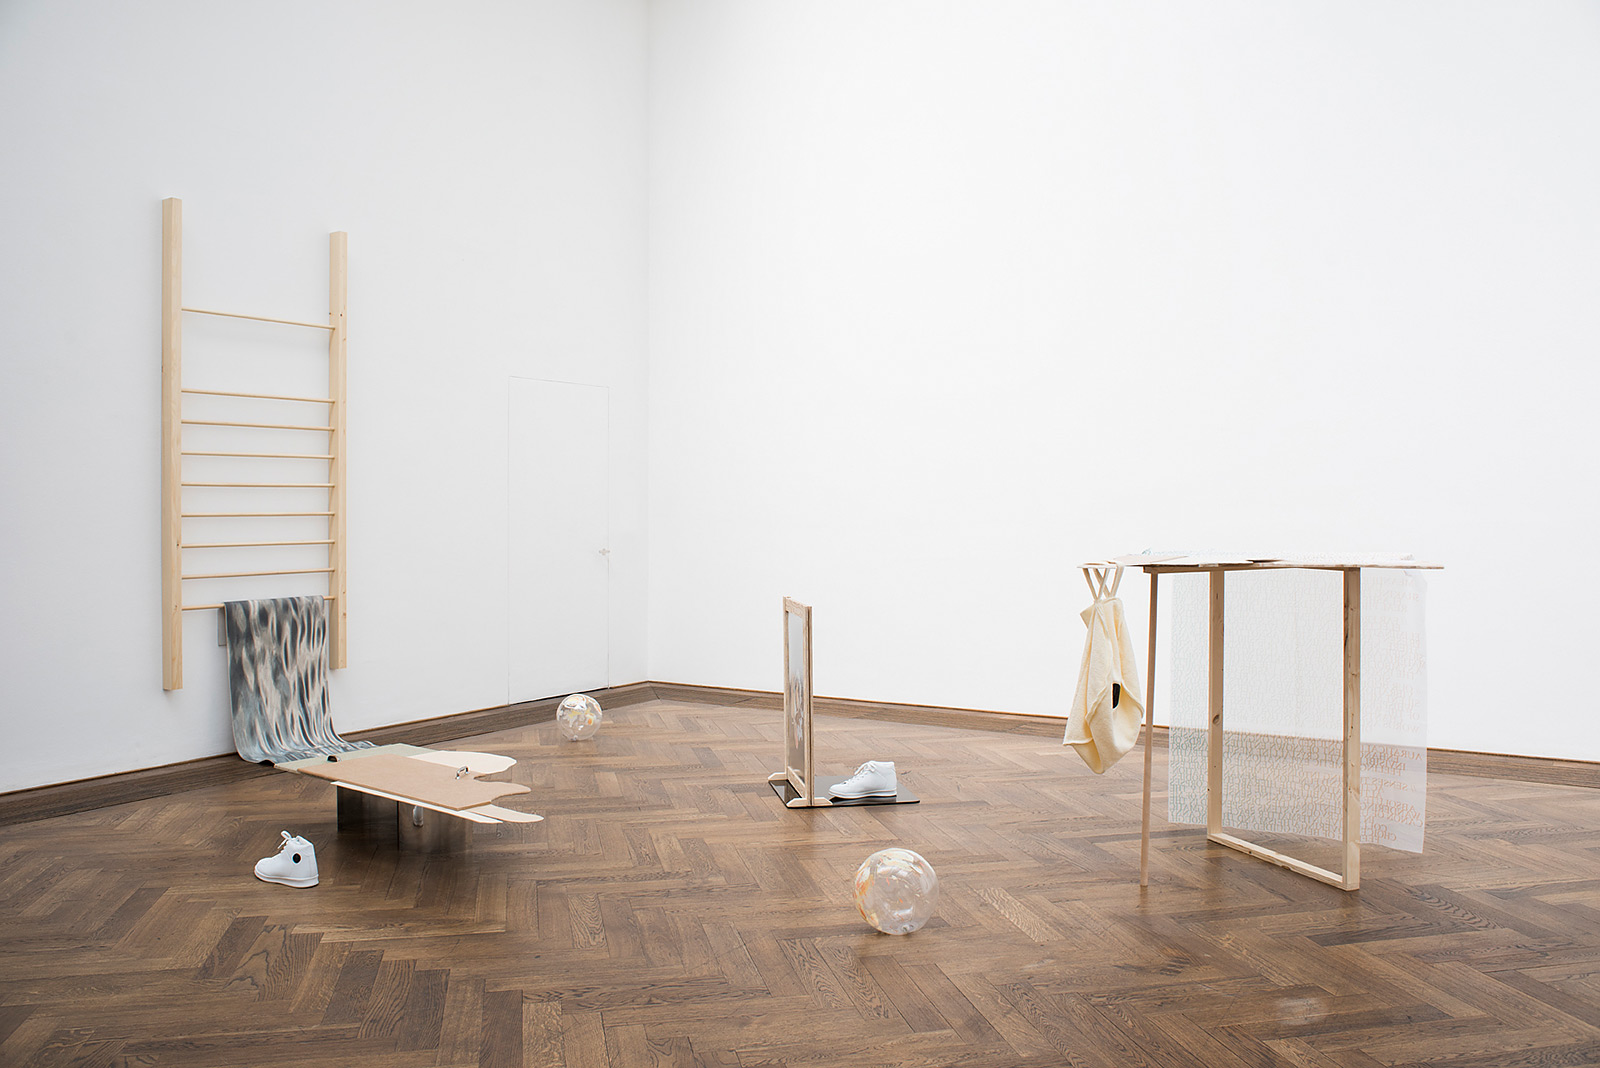 Marc Norbert Hörler «new area: parcours for the dissolution of the body»  | Institut Kunst, Diplom Bachelor 2016